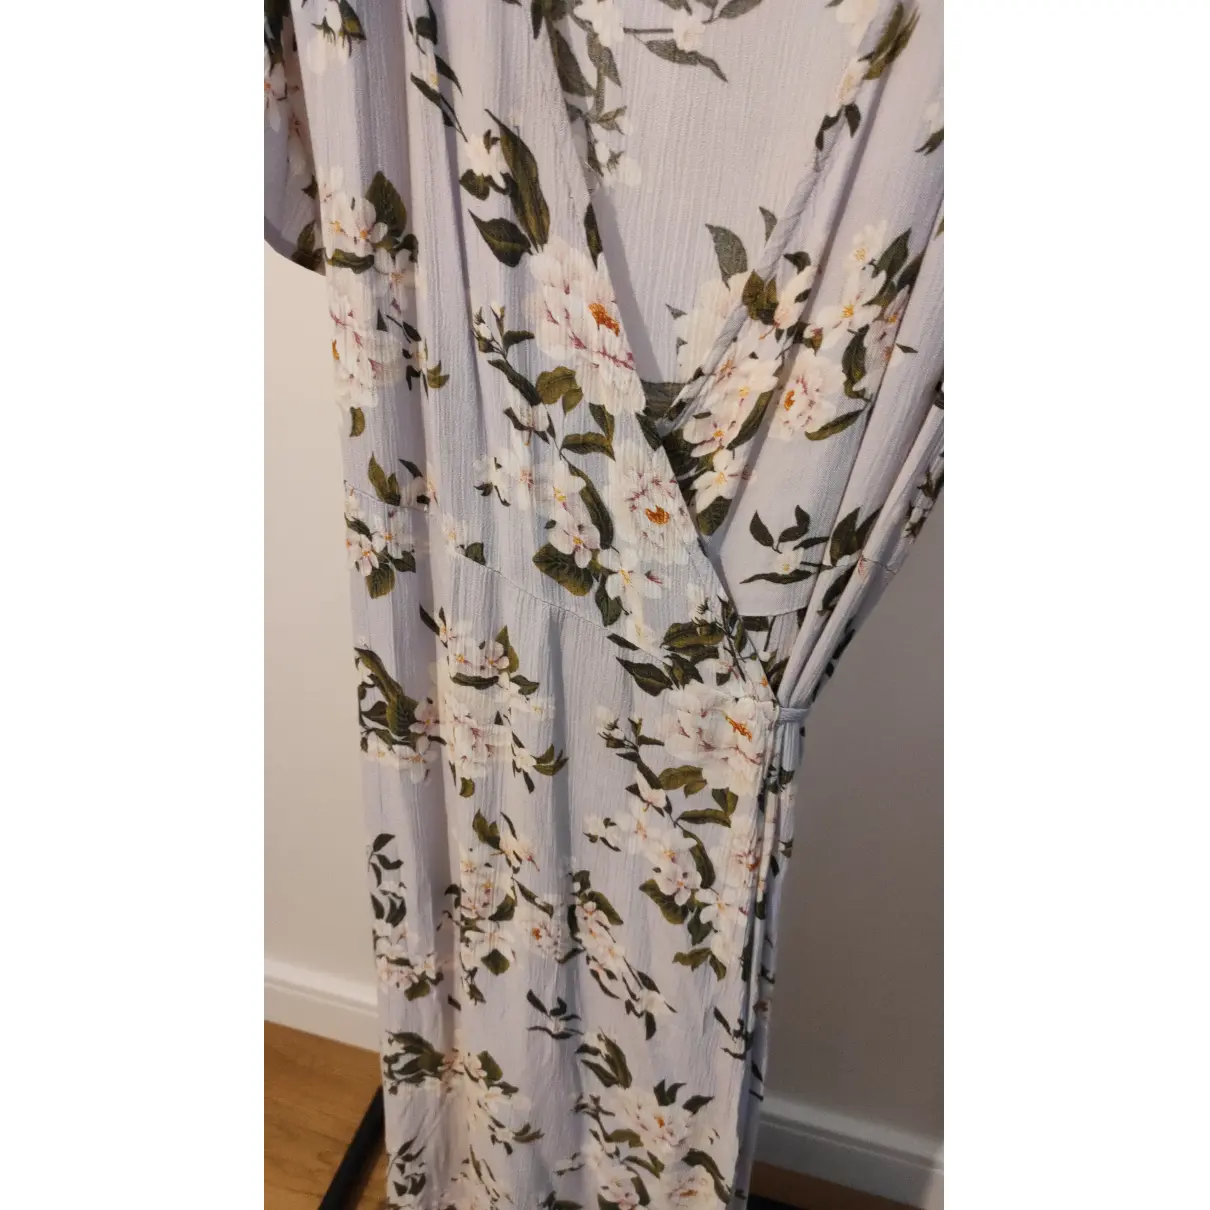 Maxi dress American Outfitters